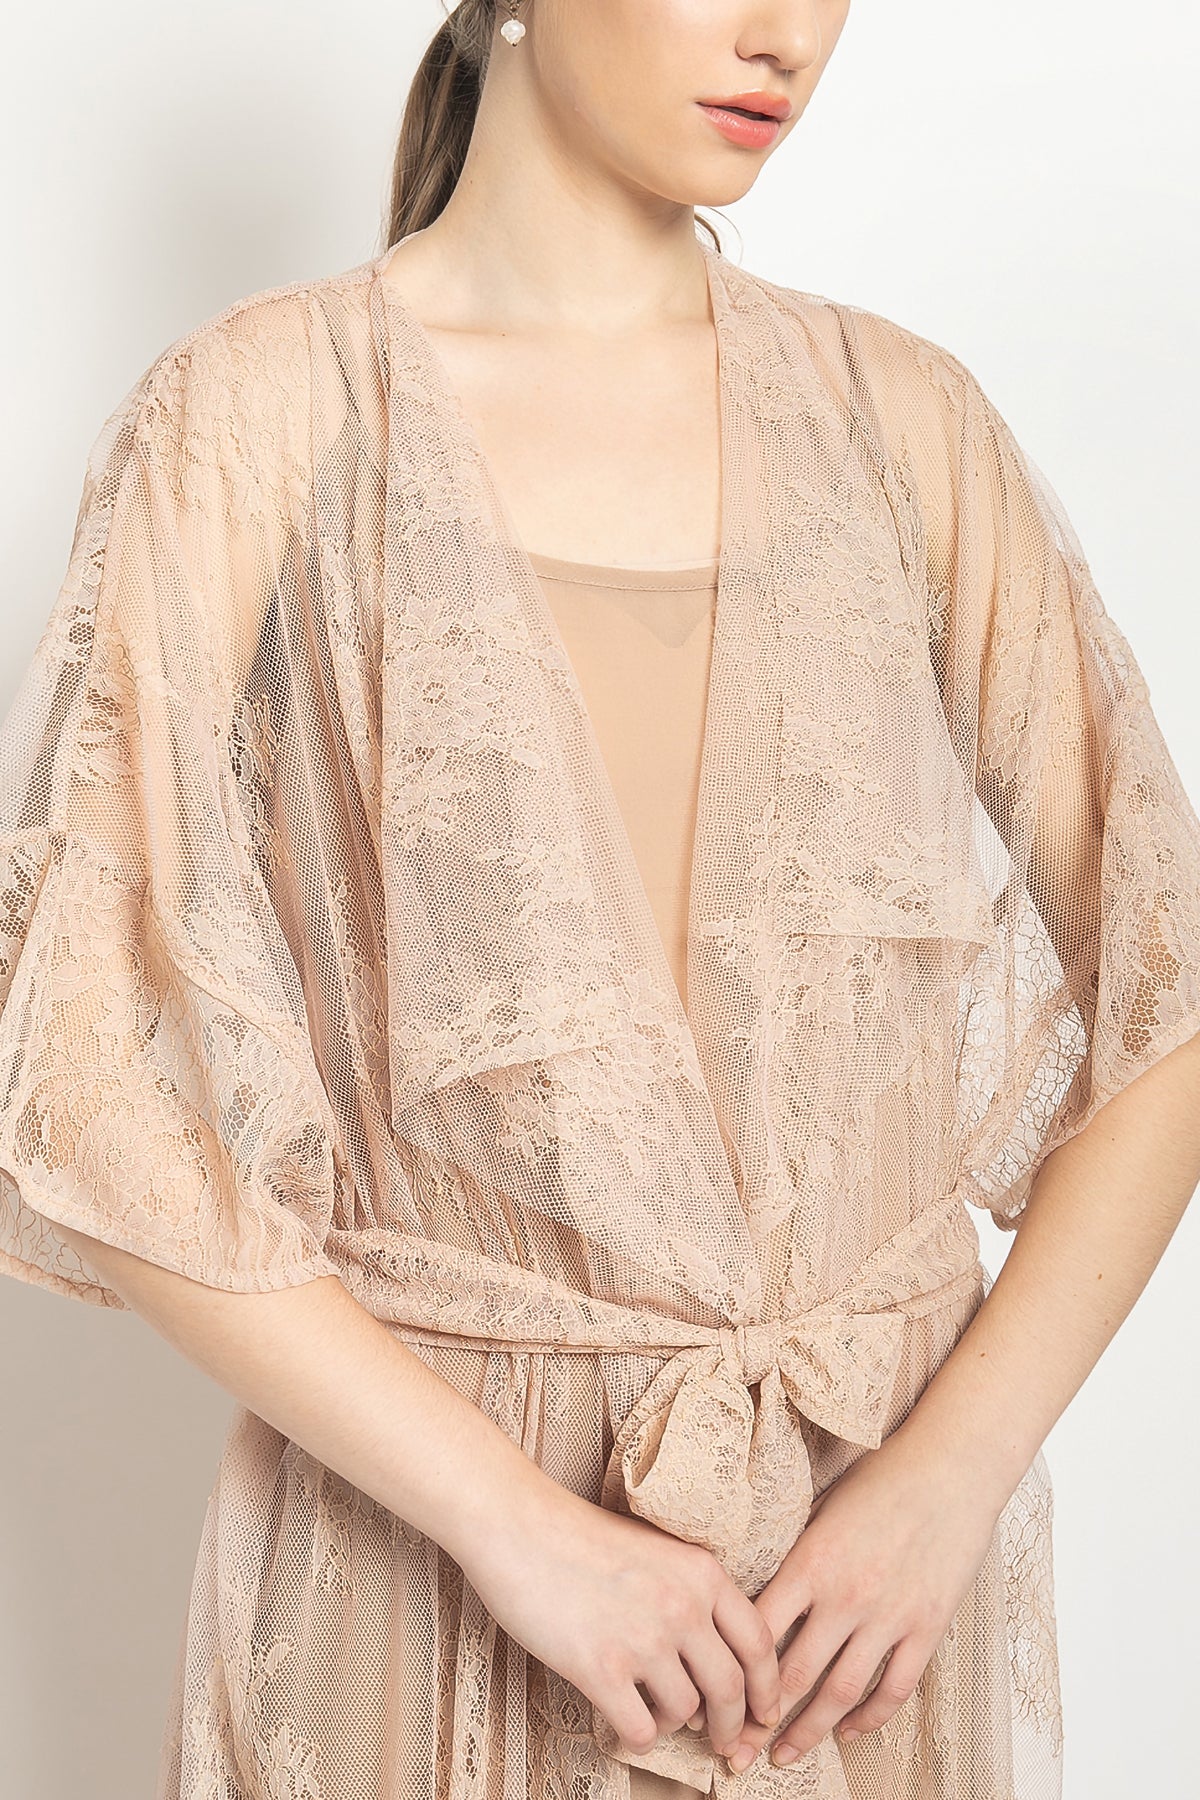 Amari Outer Dress in Dusty Pink